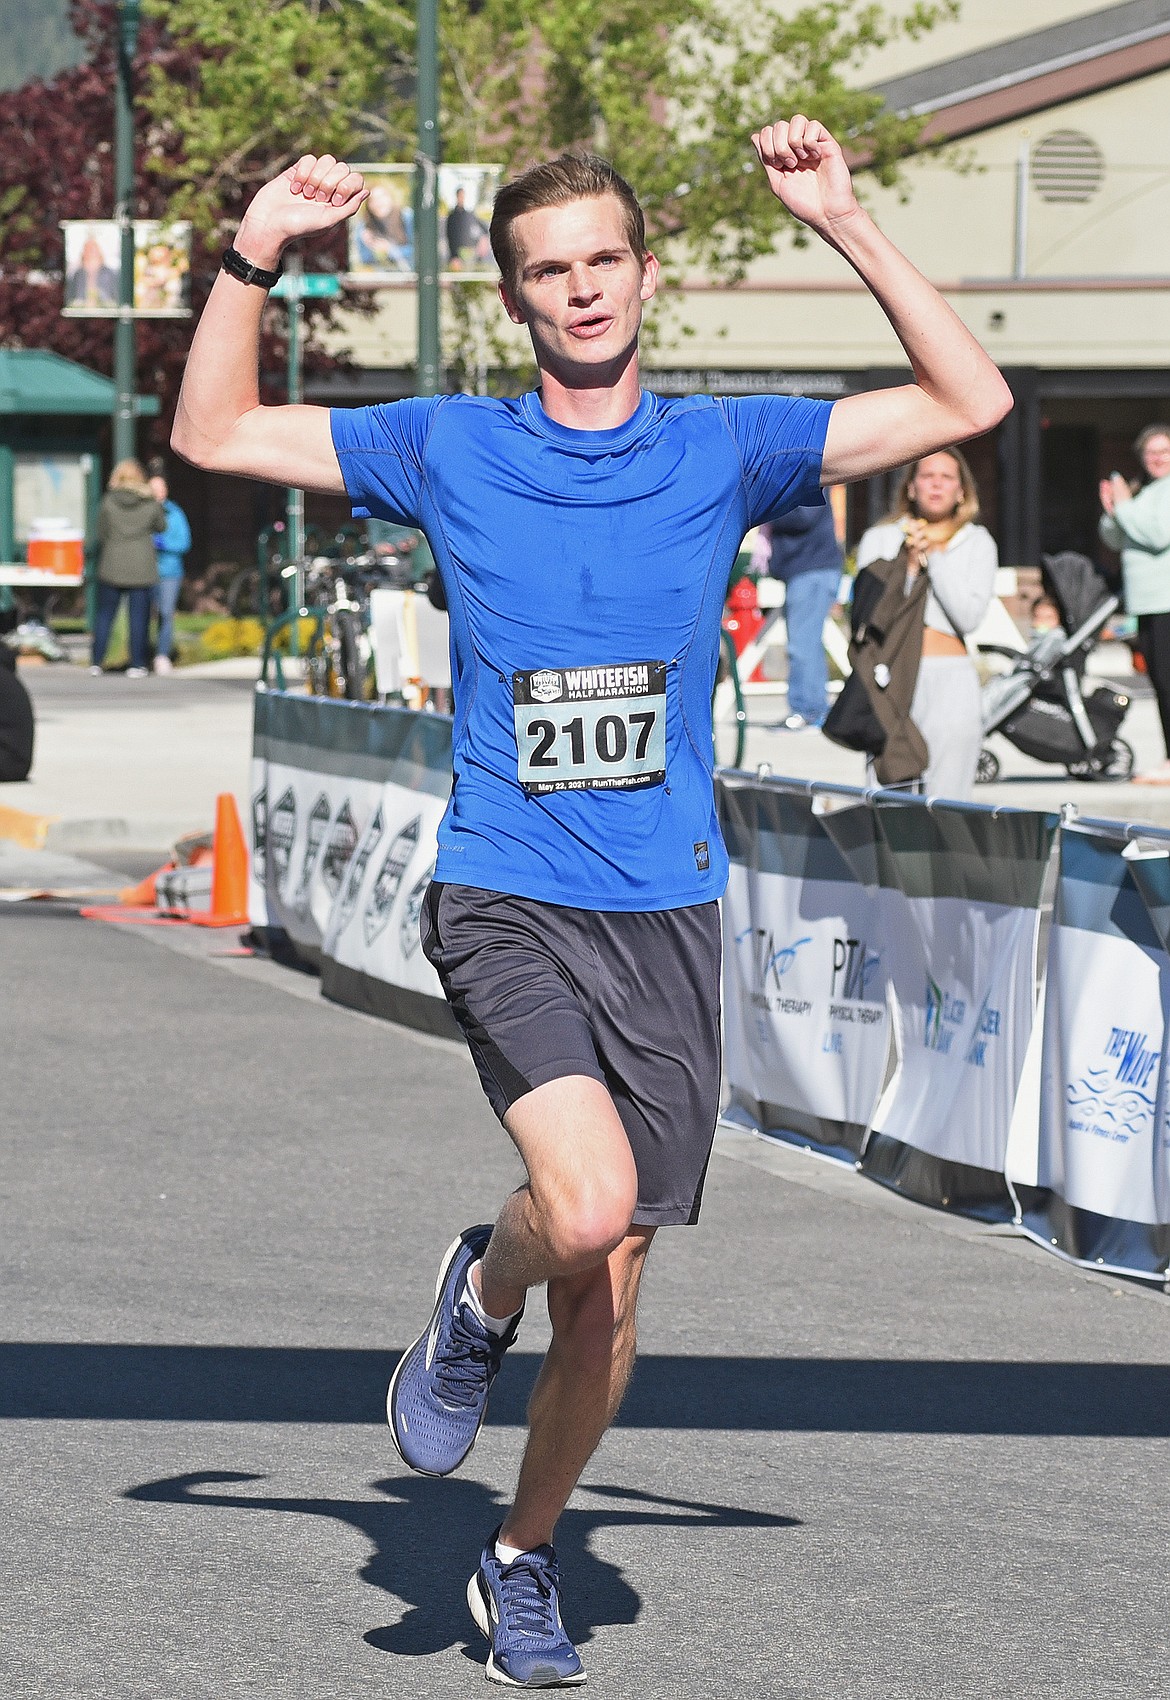 Adam McMonagle of Eagan, Minnesota runs across the finish line to take third overall in the mens division in the Whitefish Half Marathon on Saturday. (Whitney England/Whitefish Pilot)